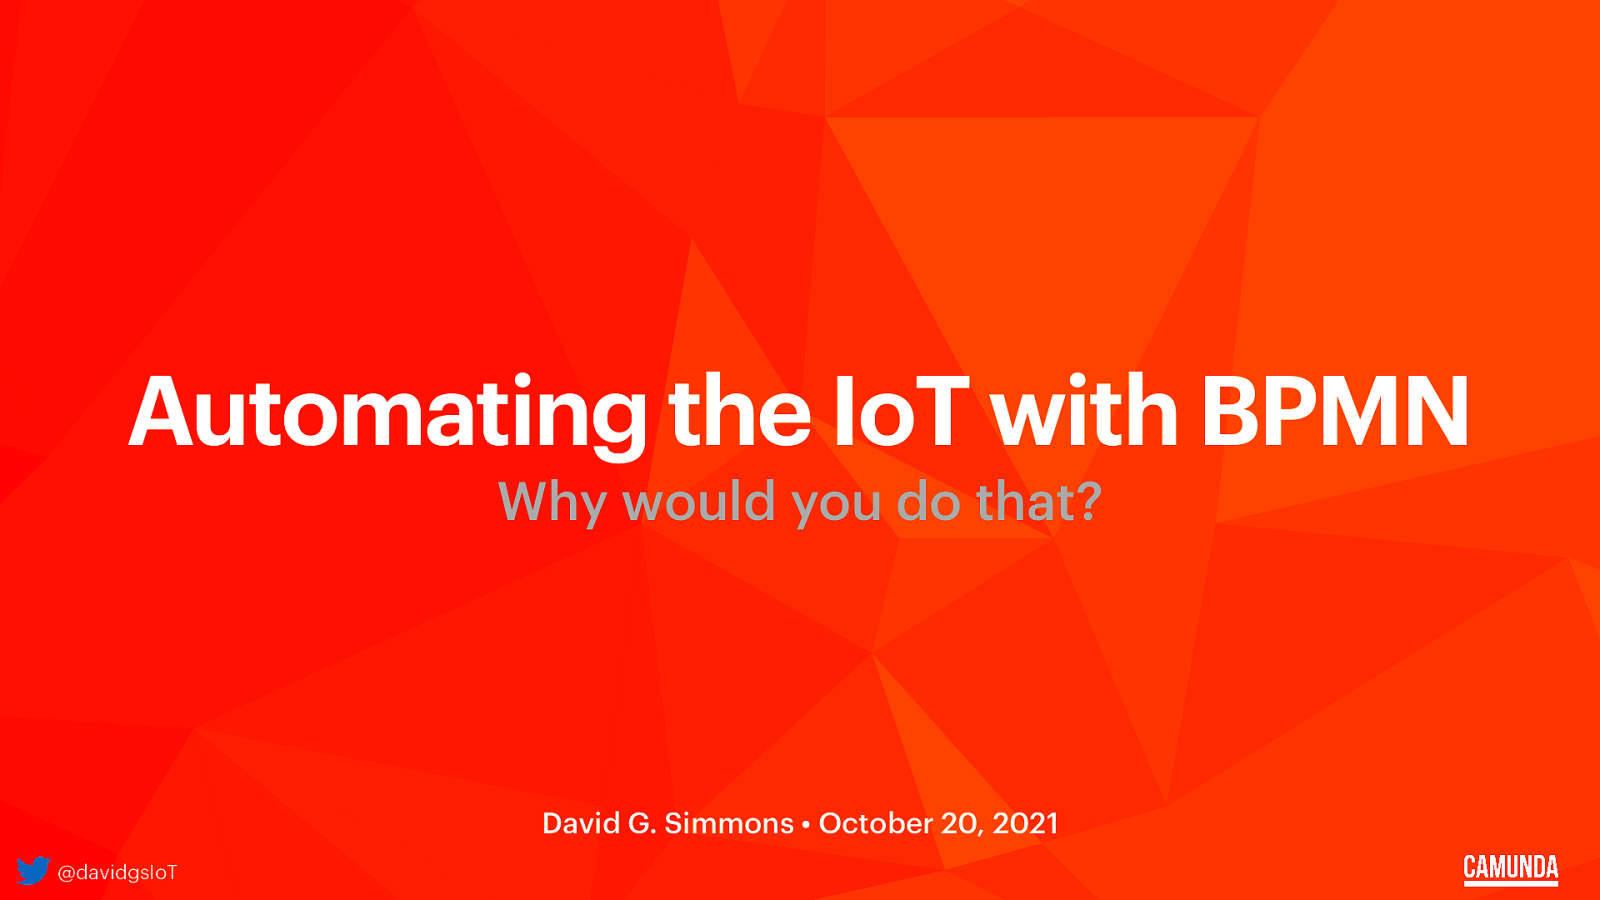 Automating the IoT with BPMN